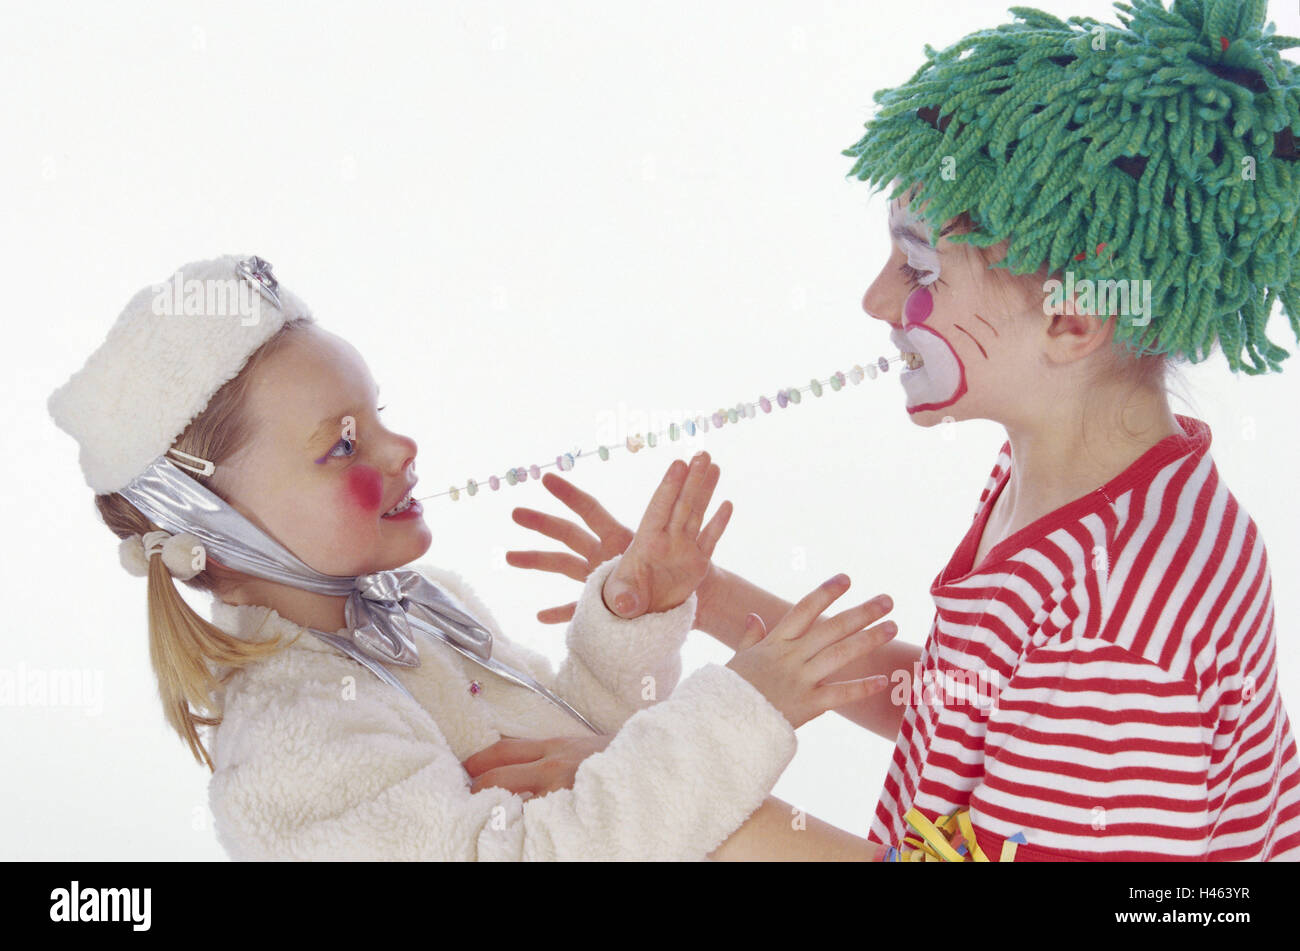 Carnival, children, two, disguise, costumes, clown, ice princess, candy chain, eating, sharing, opposite, Stock Photo